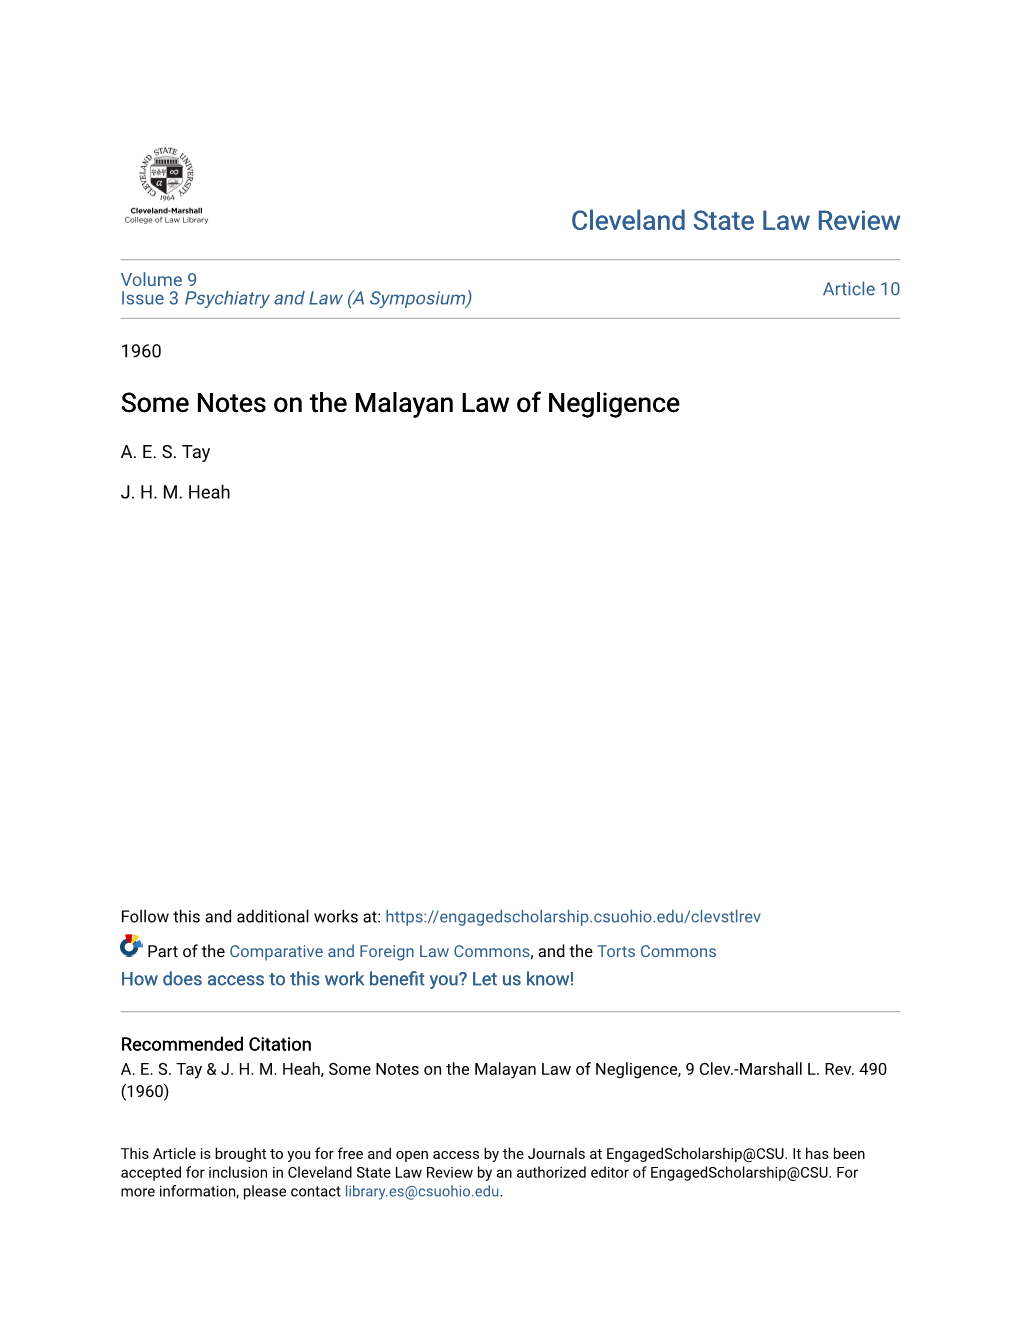 Some Notes on the Malayan Law of Negligence